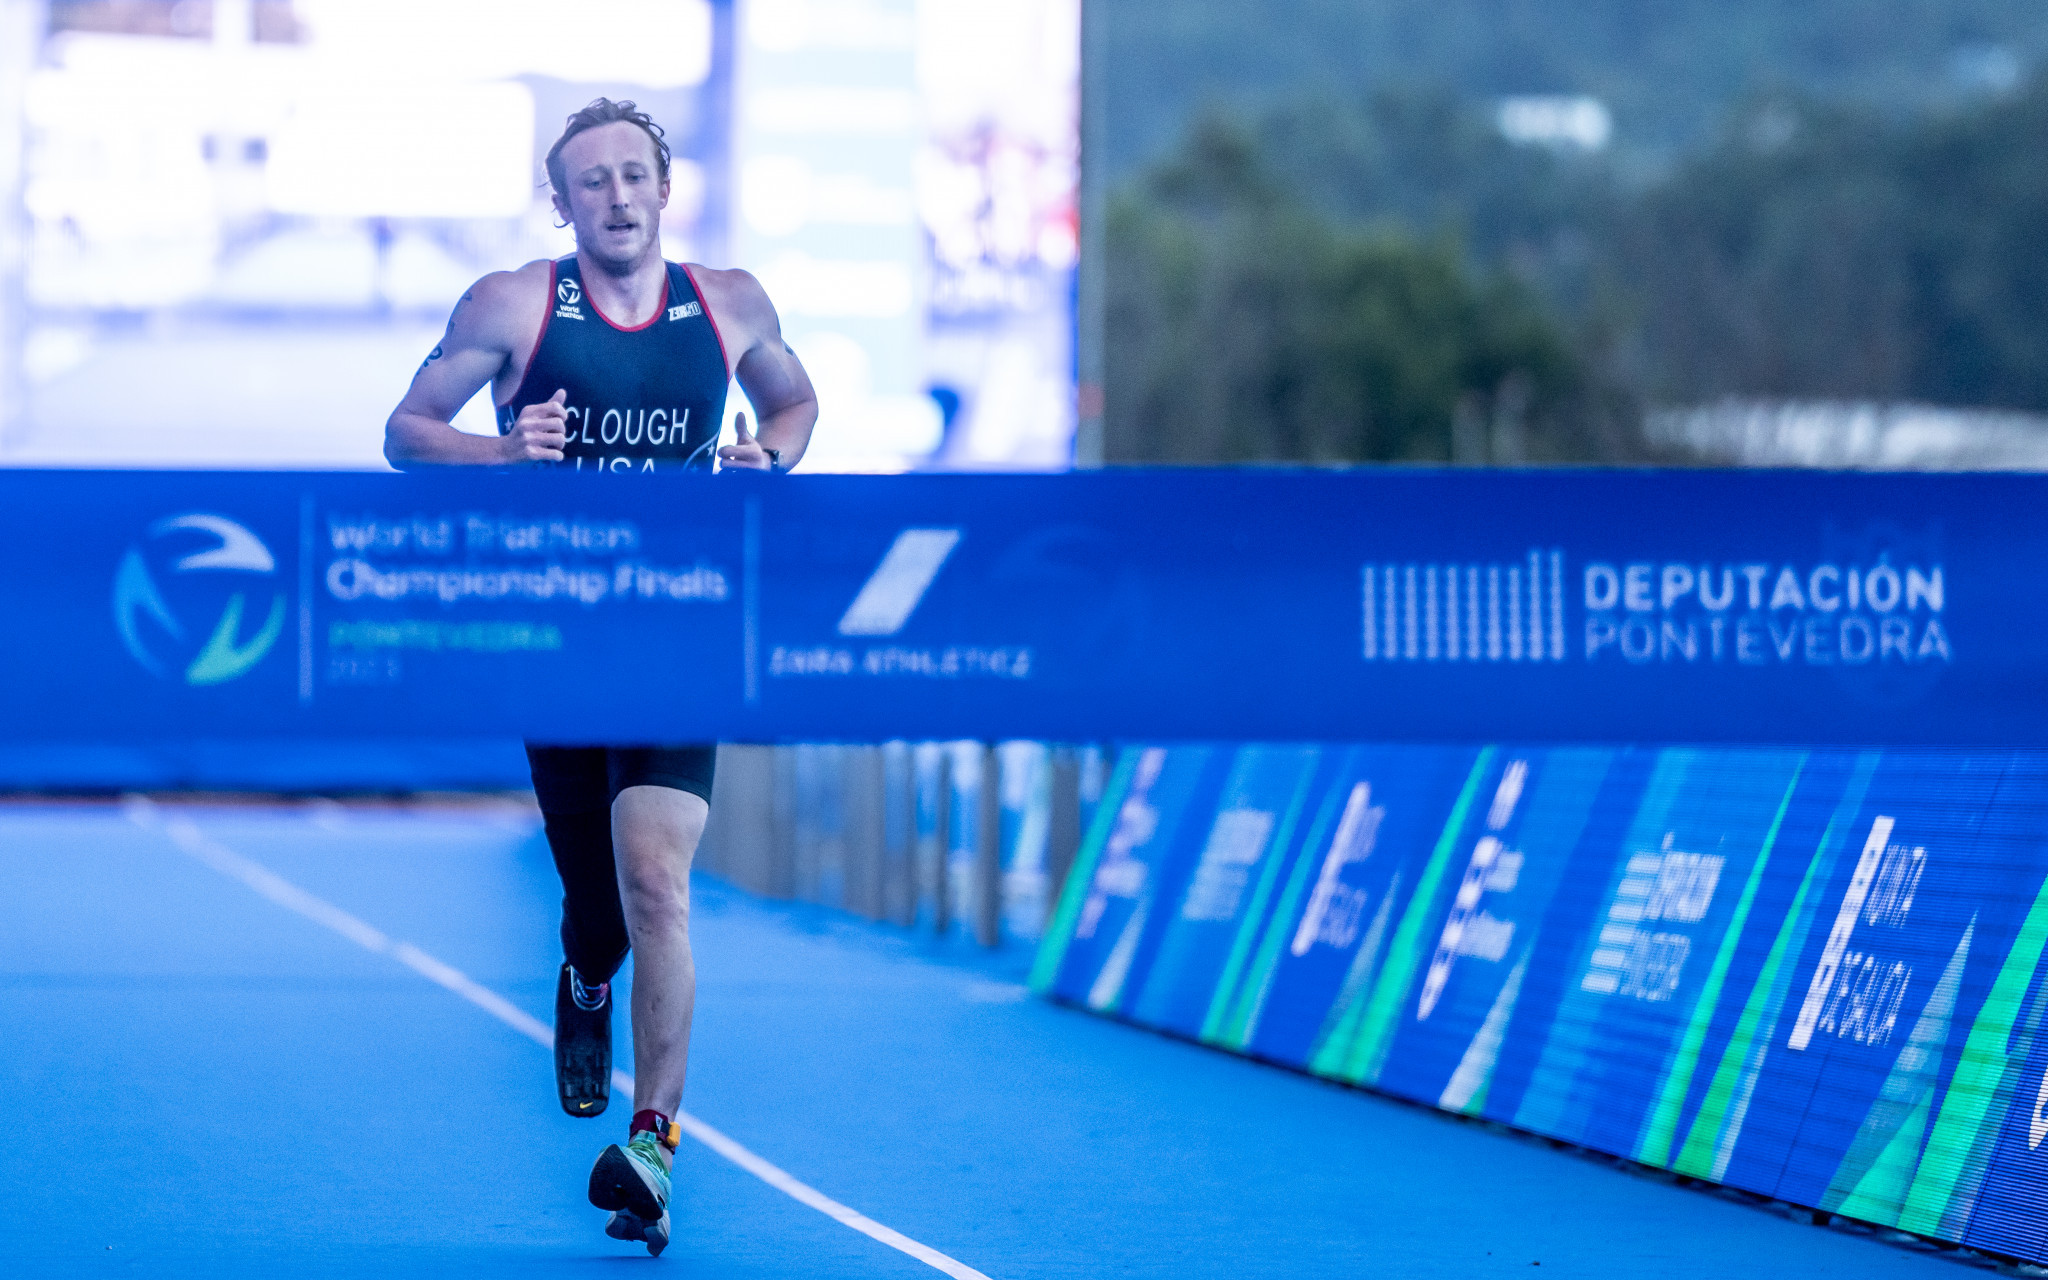 Carson Clough brought the United States home to back-to-back Para triathlon mixed relay golds at the World Triathlon Championship Finals ©World Triathlon